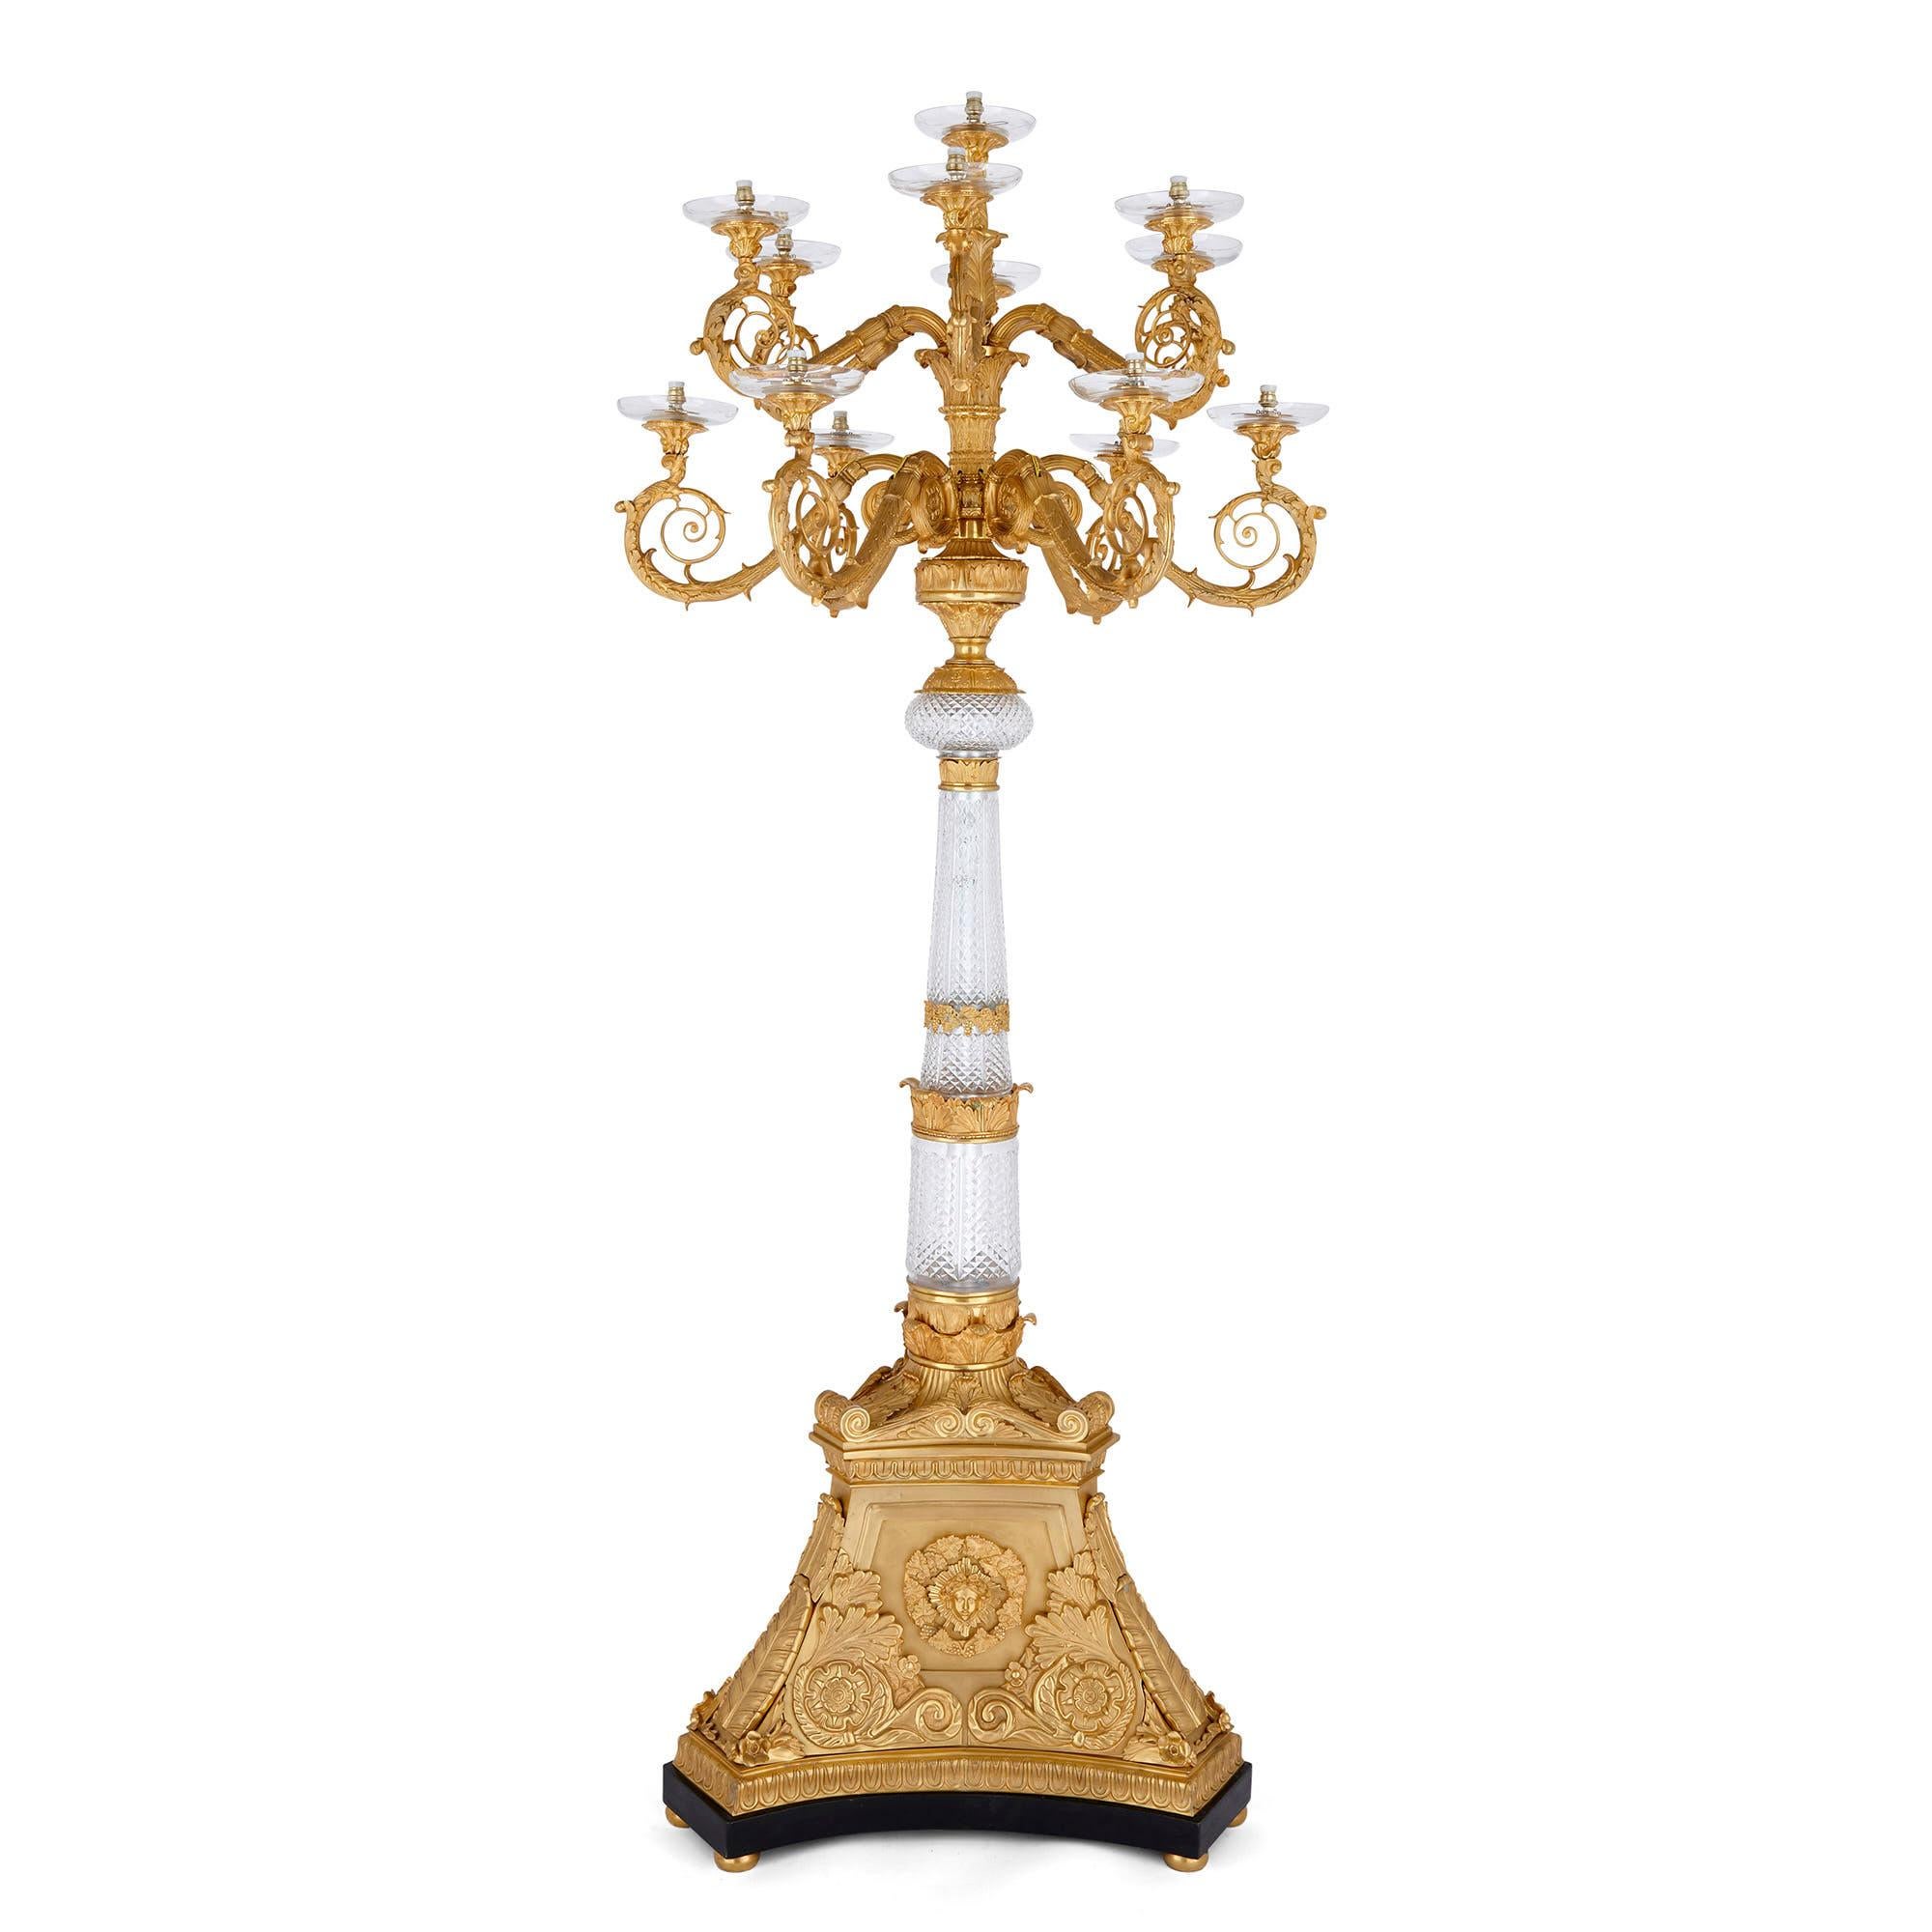 Pair of monumental gilt bronze and glass floor standing candelabra

Crafted in the neoclassical style, this pair of floor-standing candelabra are supported by three-sided plinth-form ormolu bases, which narrow towards the tops. The bases sit on